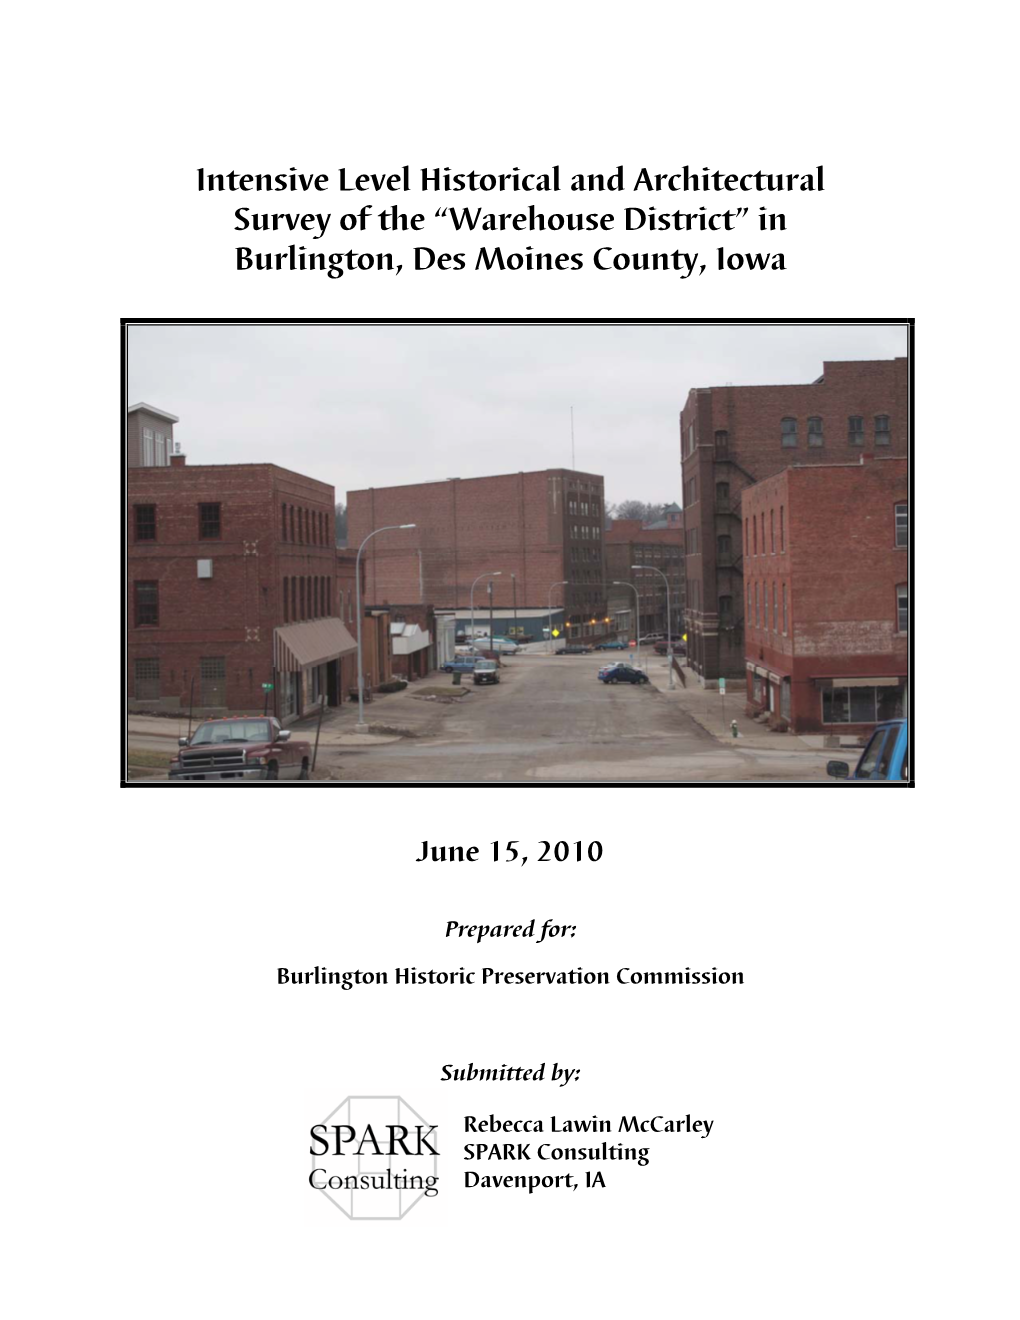 Intensive Level Historical and Architectural Survey of the “Warehouse District” in Burlington, Des Moines County, Iowa